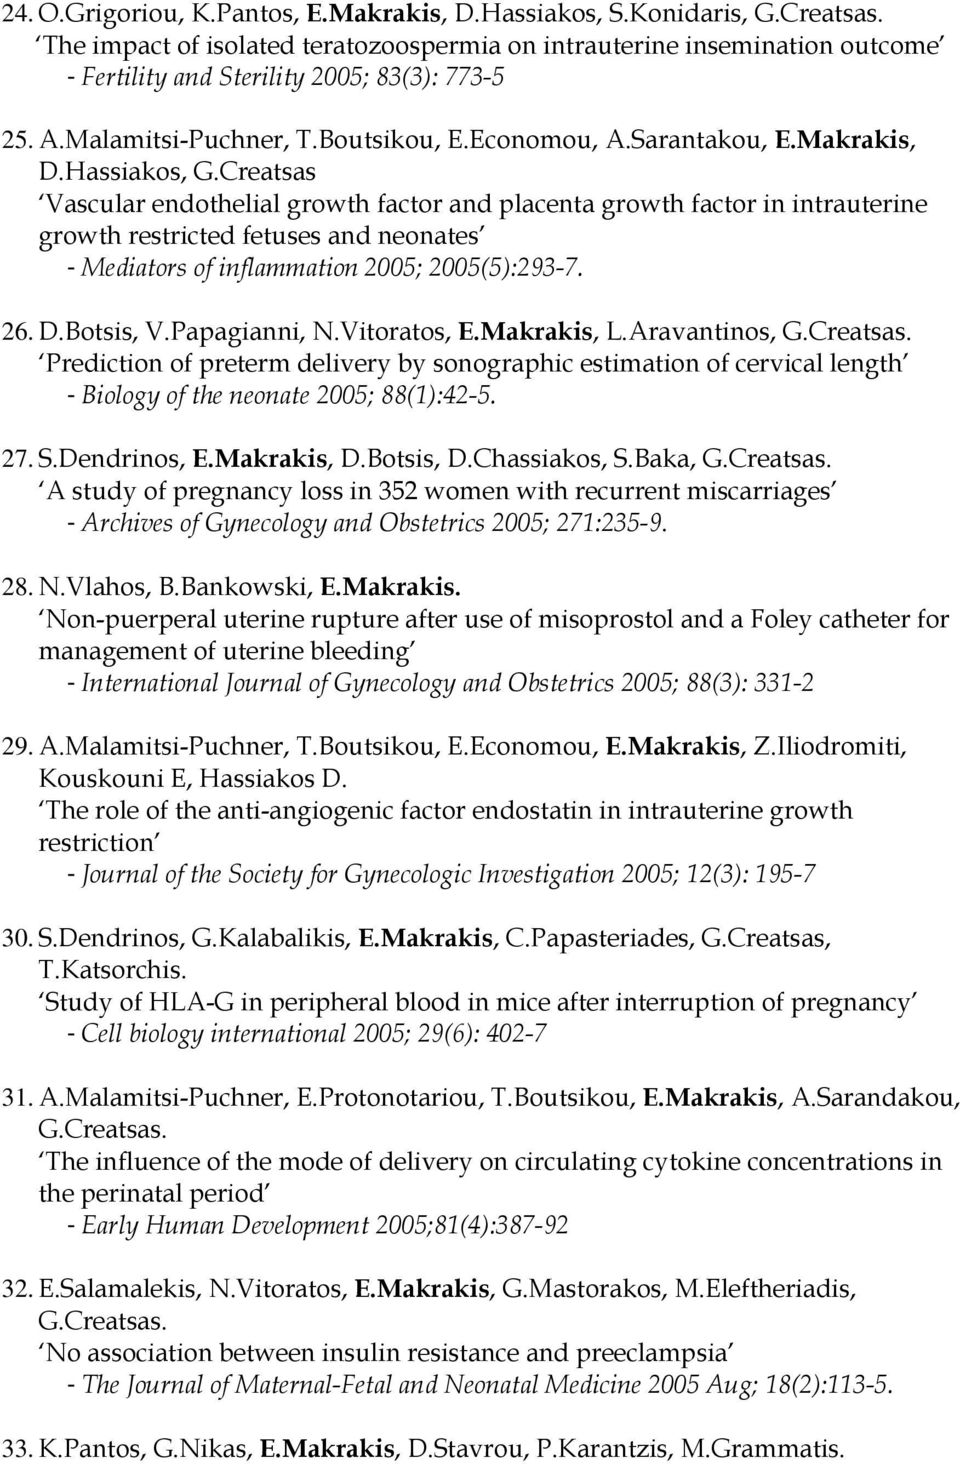 Hassiakos, G.Creatsas Vascular endothelial growth factor and placenta growth factor in intrauterine growth restricted fetuses and neonates - Mediators of inflammation 2005; 2005(5):293-7. 26. D.